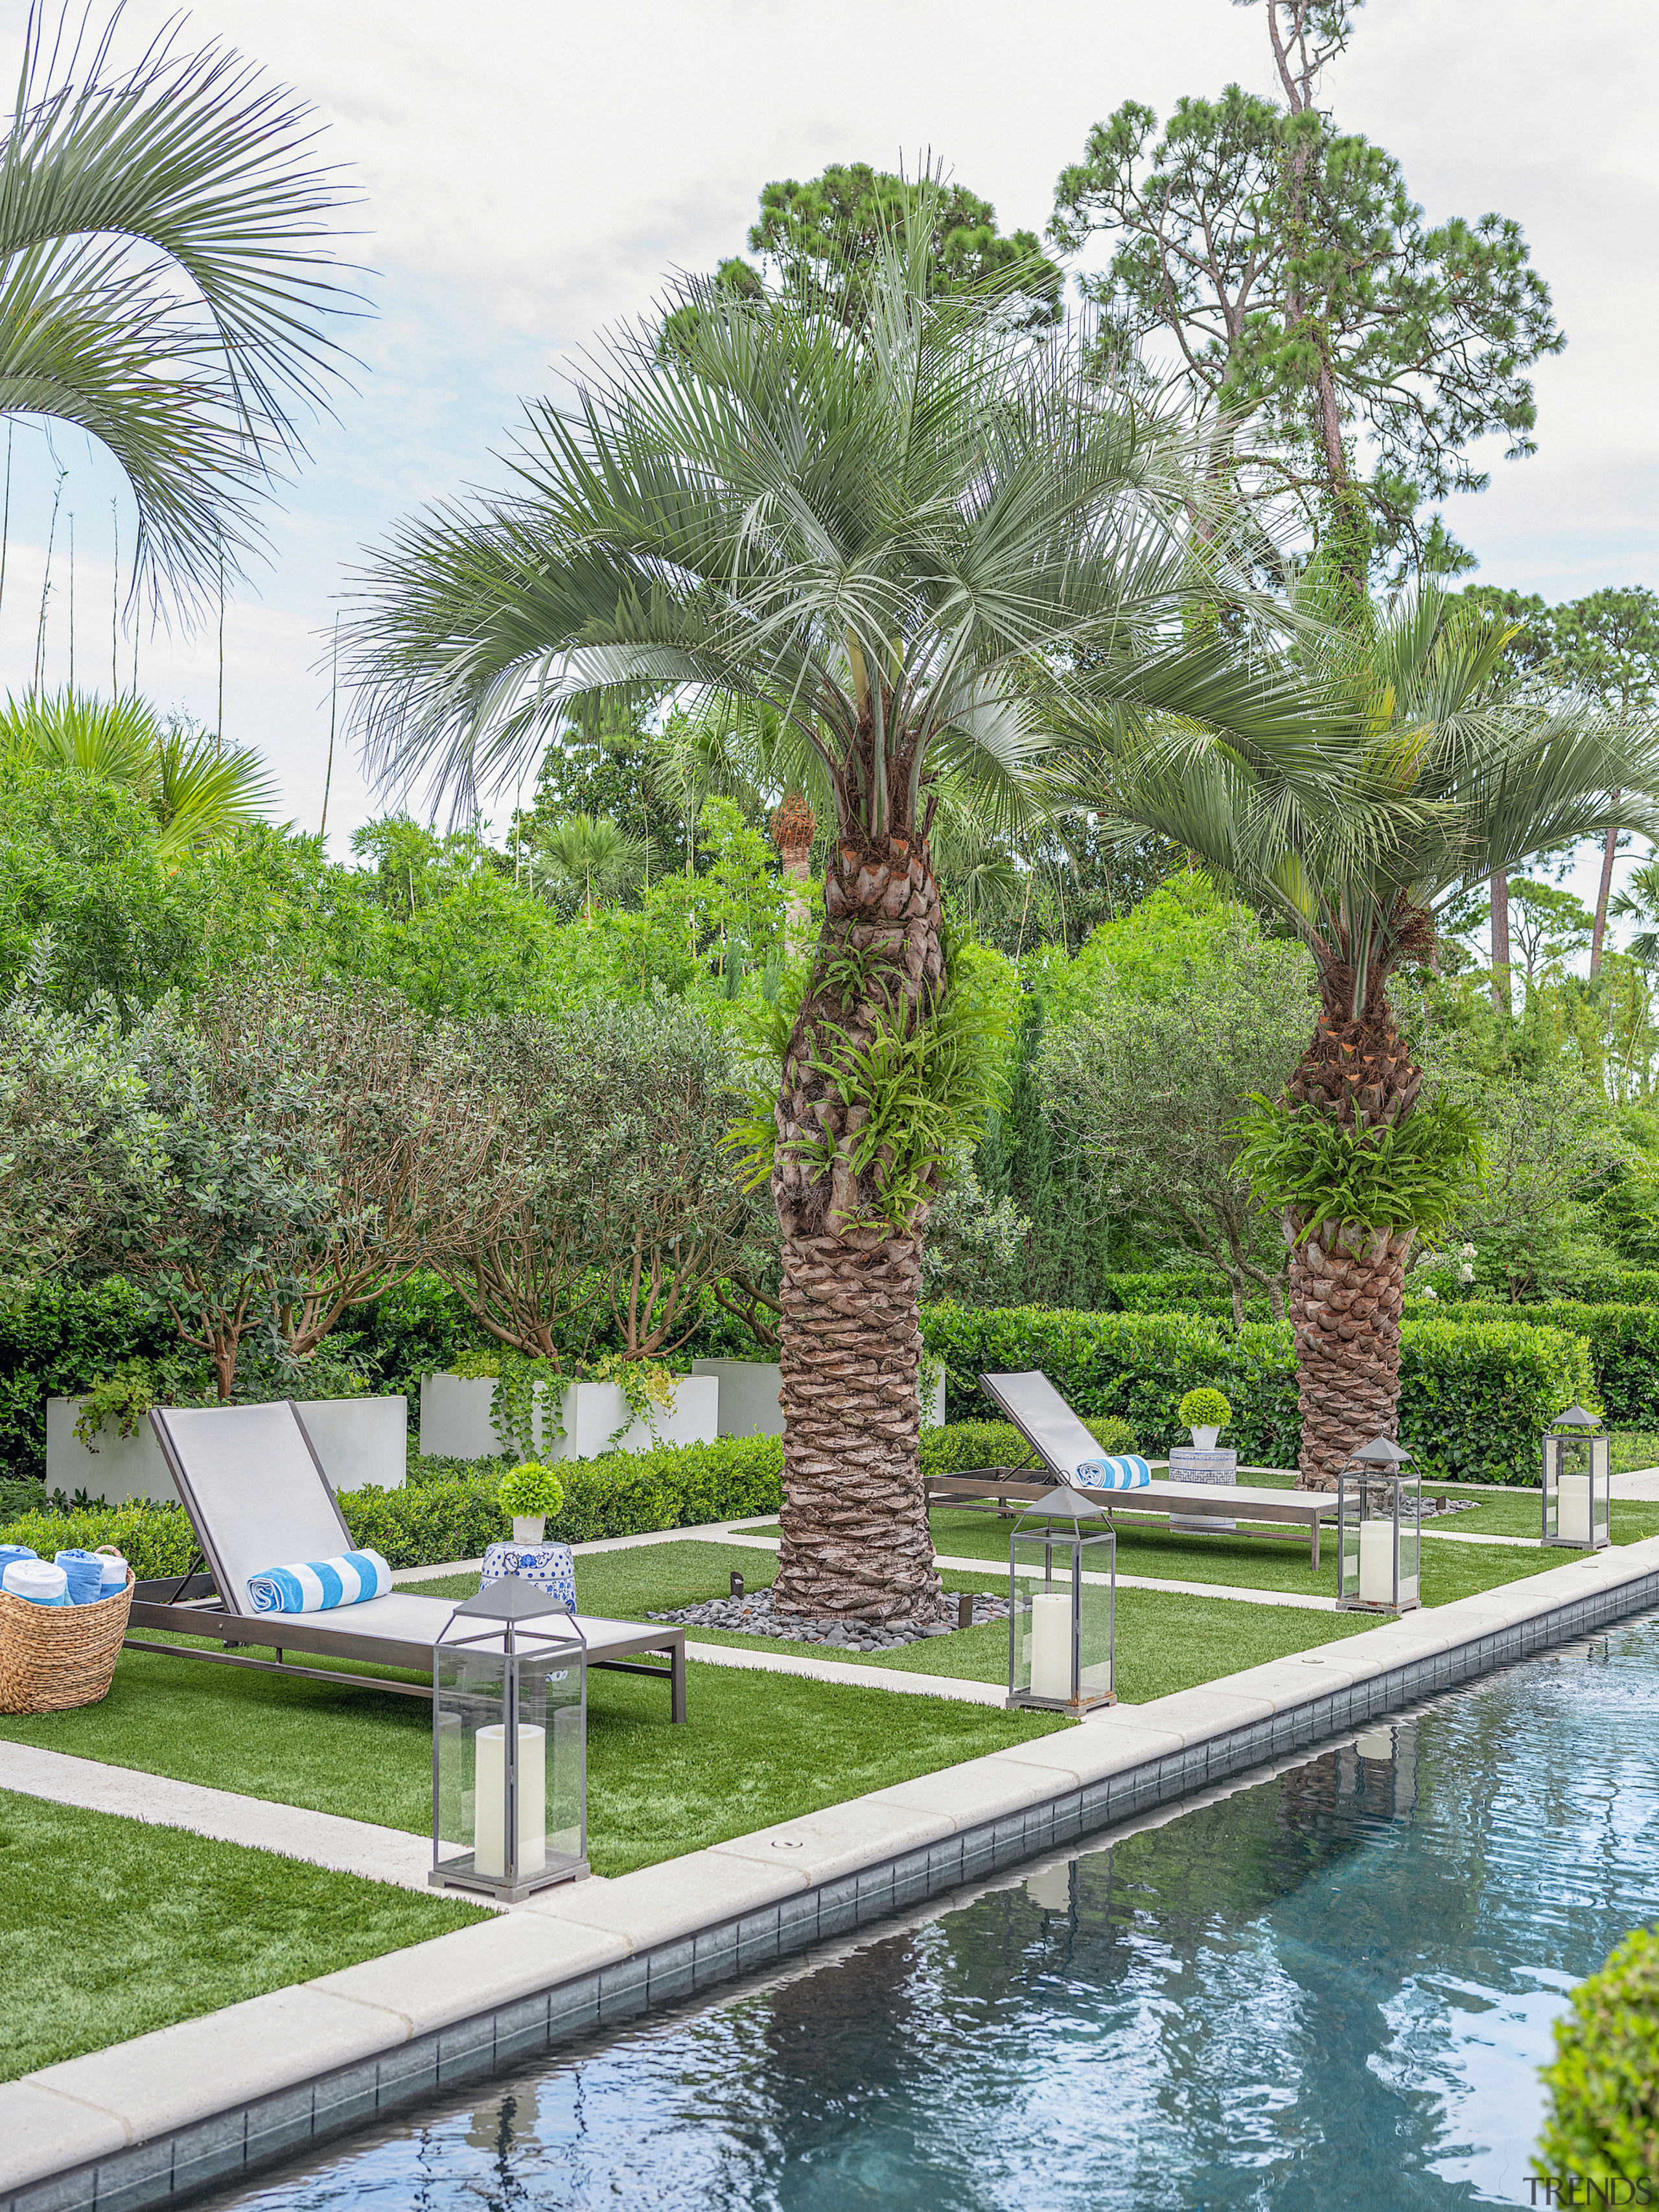 Mature palms stand to attention poolside. - Formal 